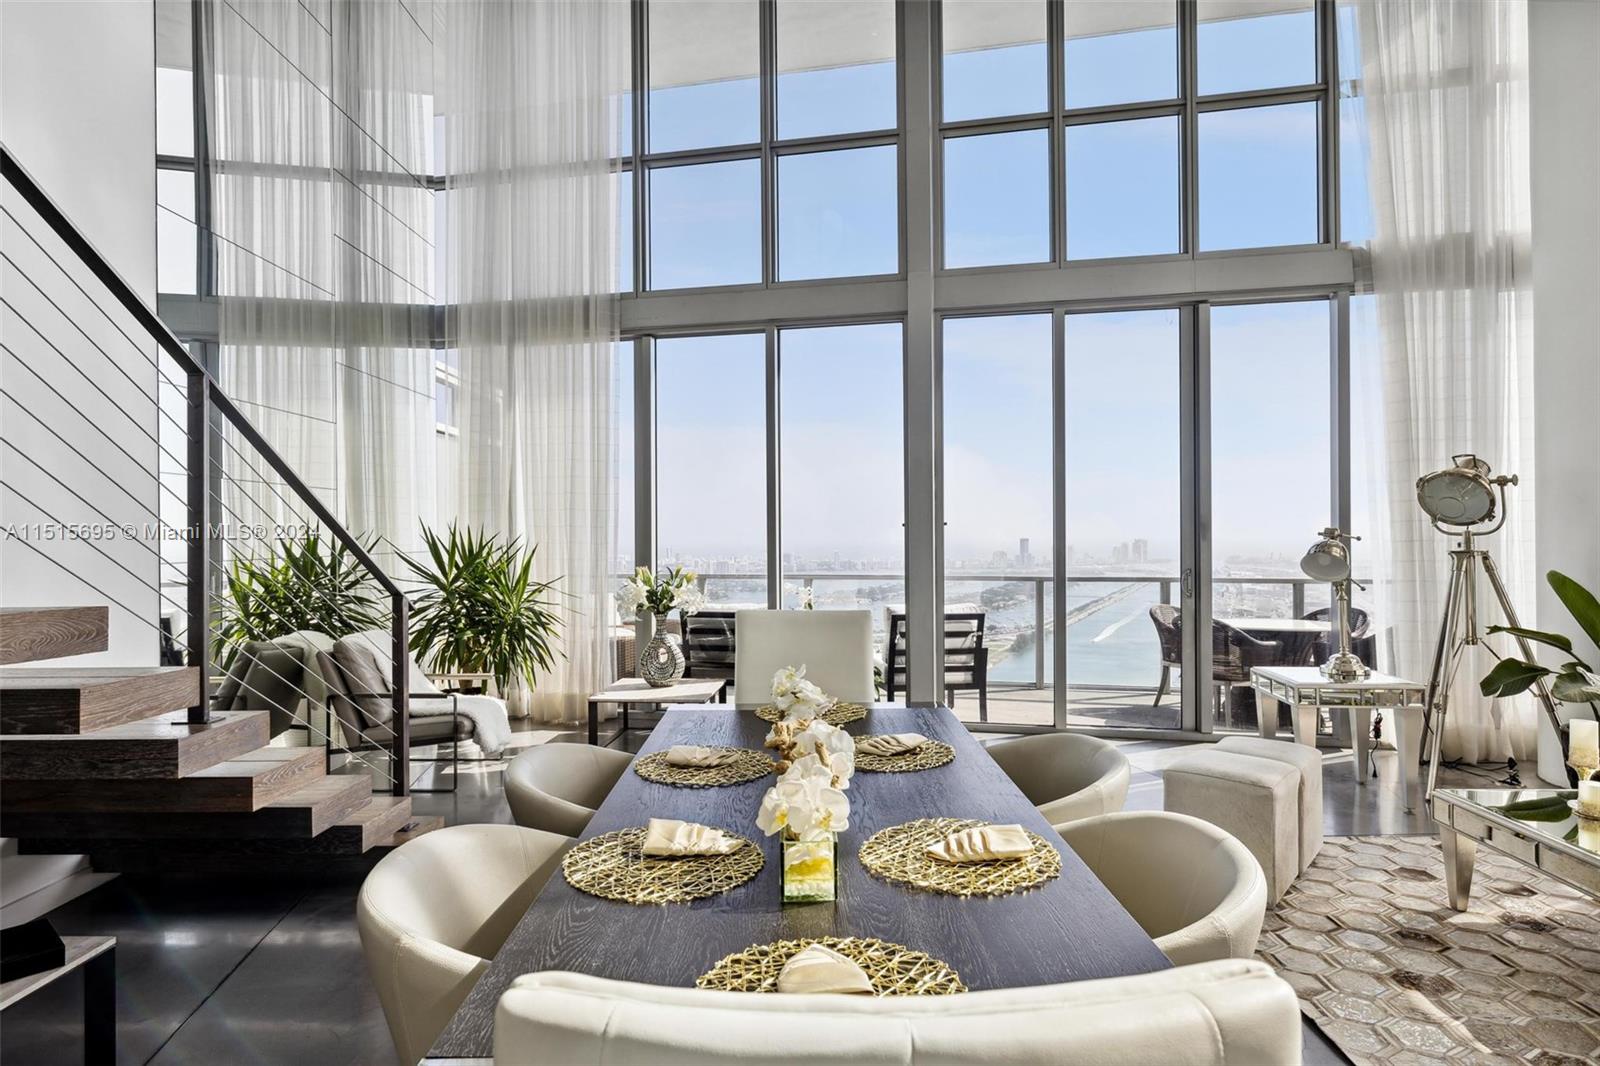 This exceptional 3-level penthouse, perched on the 63rd floor, features 3 bedrooms and 4.5 bathrooms, along with a spacious office/studio easily convertible into a 4th bedroom. The residence showcases a sleek, modern design, complete with a wine cellar, floating staircases, and an impressive 22-foot ceiling. It spans 3,381 square feet, complemented by an additional 1,028 square foot rooftop terrace. This outdoor haven offers a dining area and private Jacuzzi, perfect for entertaining and enjoying panoramic views of the city skyline, ocean, and Biscayne Bay. The unit includes 2 assigned parking spaces. Located in Downtown Miami's vibrant heart, it is just minutes from Miami Beach, Brickell, Wynwood, Design District, and directly across from Museum Park, housing The Perez Art Museum and more